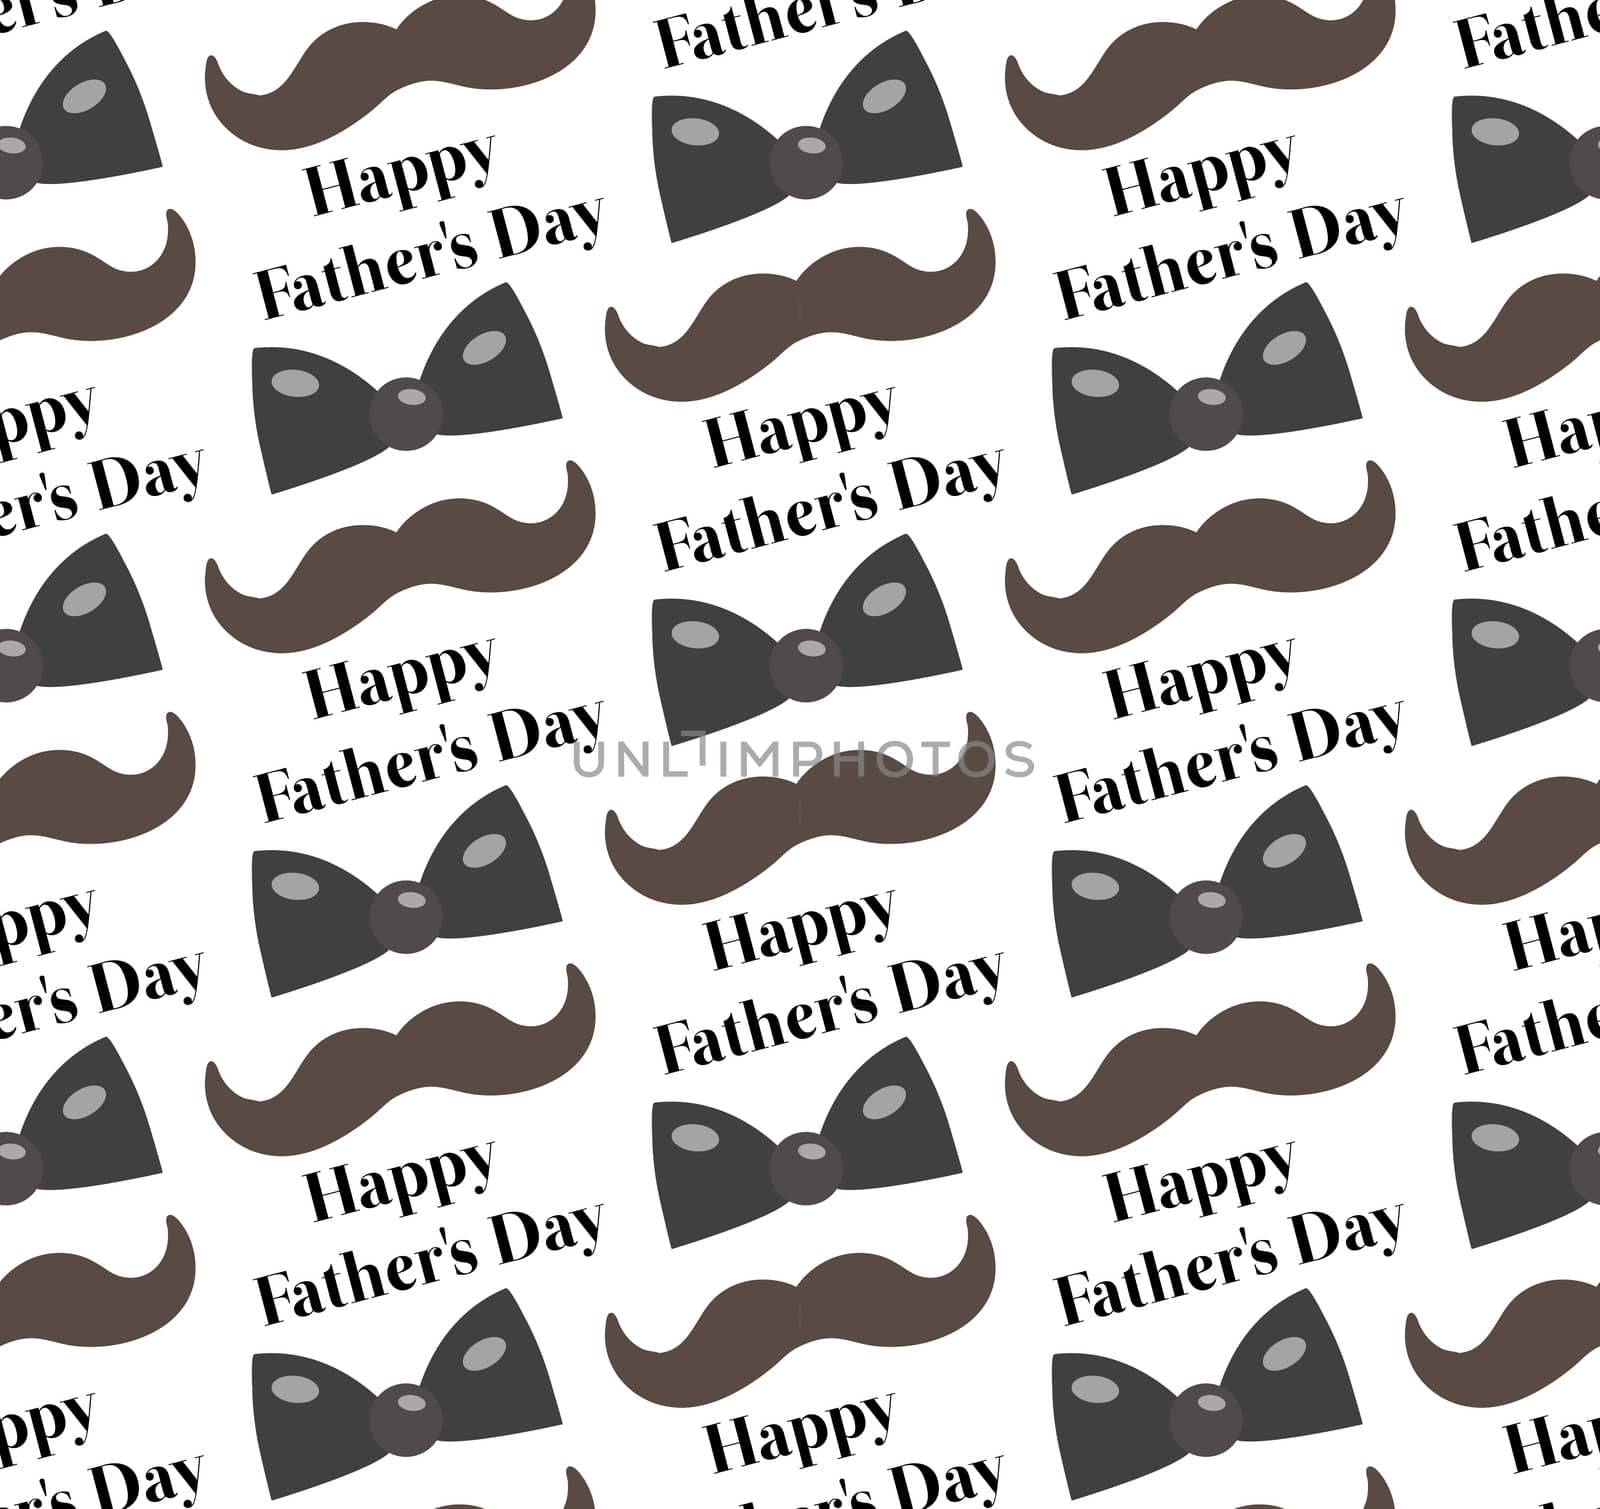 Mustache, Bow tie seamless patterns. Father s Day holiday concept repeating texture, endless background. illustration. by lucia_fox